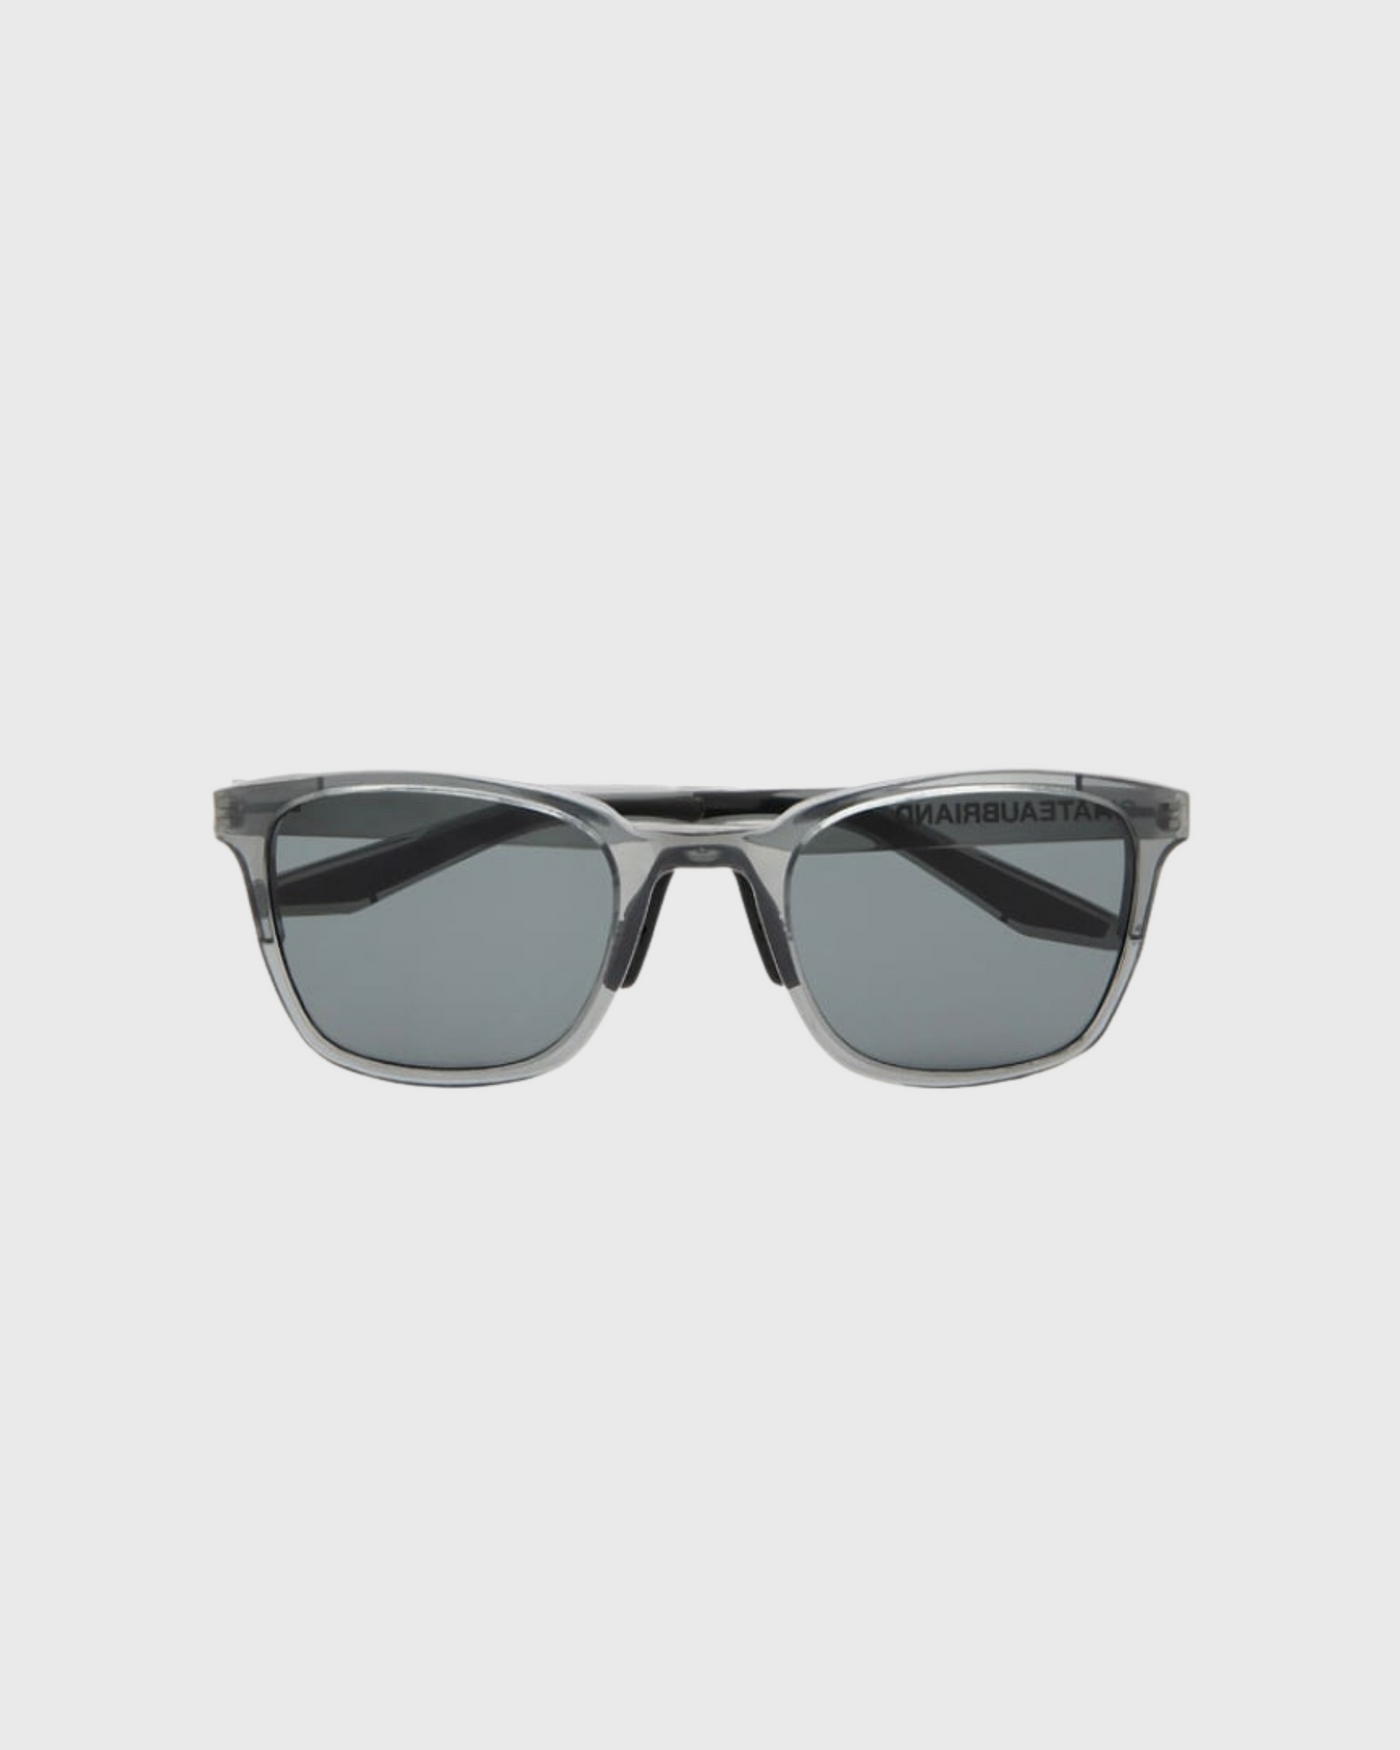 CHATEAUBRIAND SUNGLASS SPORTS TYPE